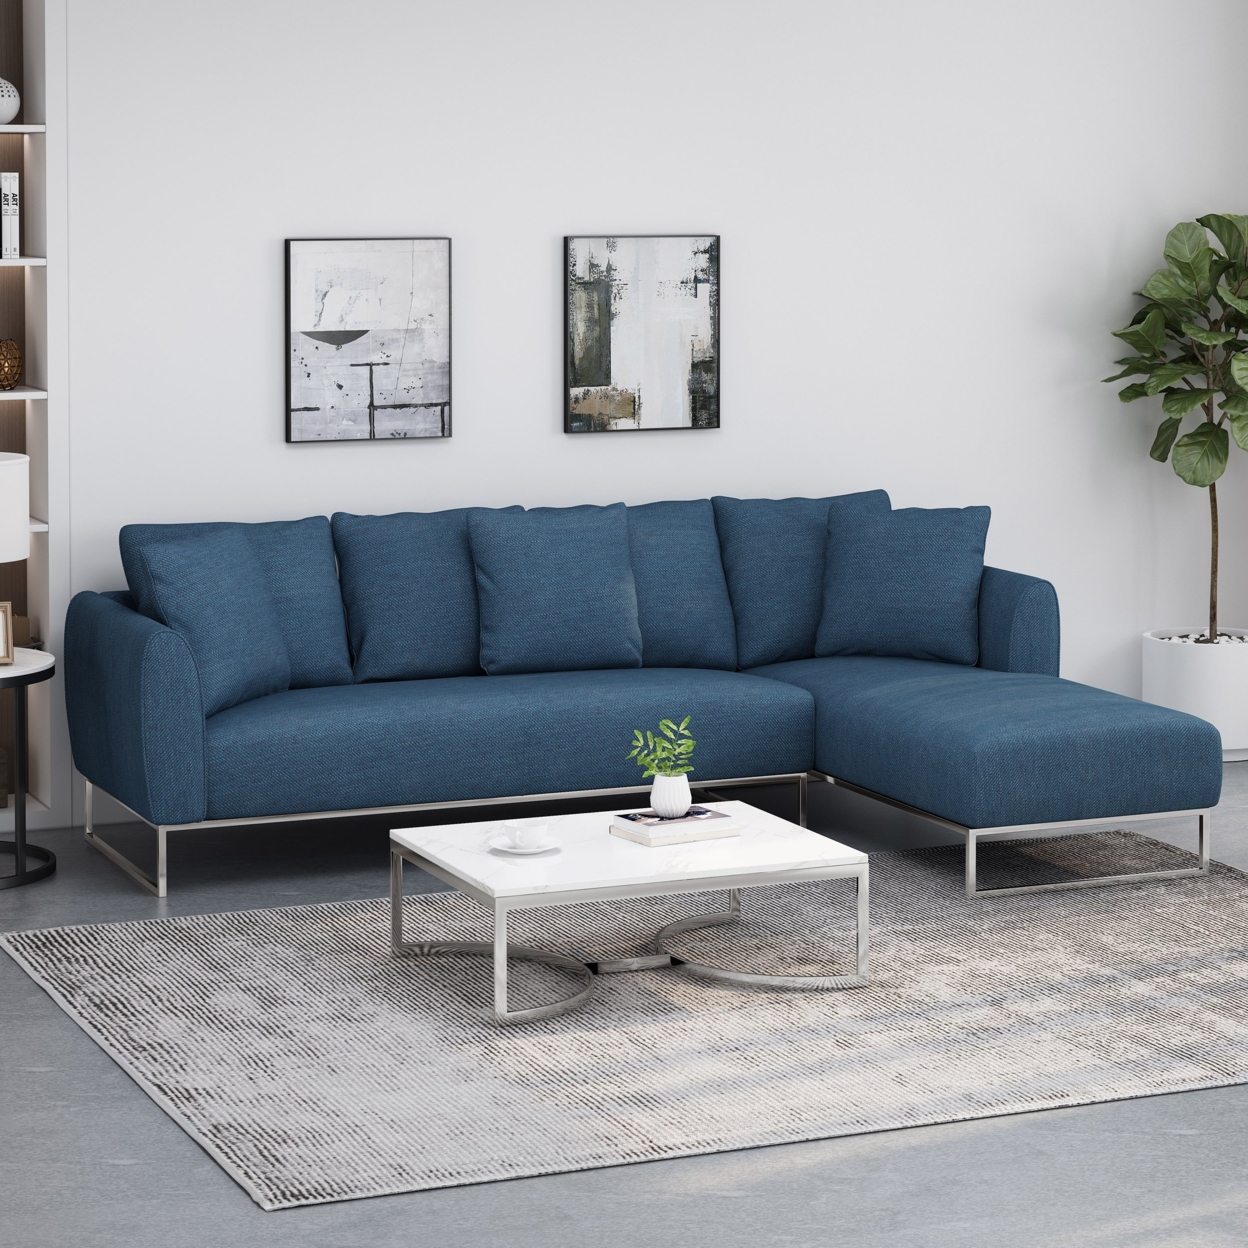 Clarke Contemporary Sectional Sofa With Chaise Lounge - Navy Blue